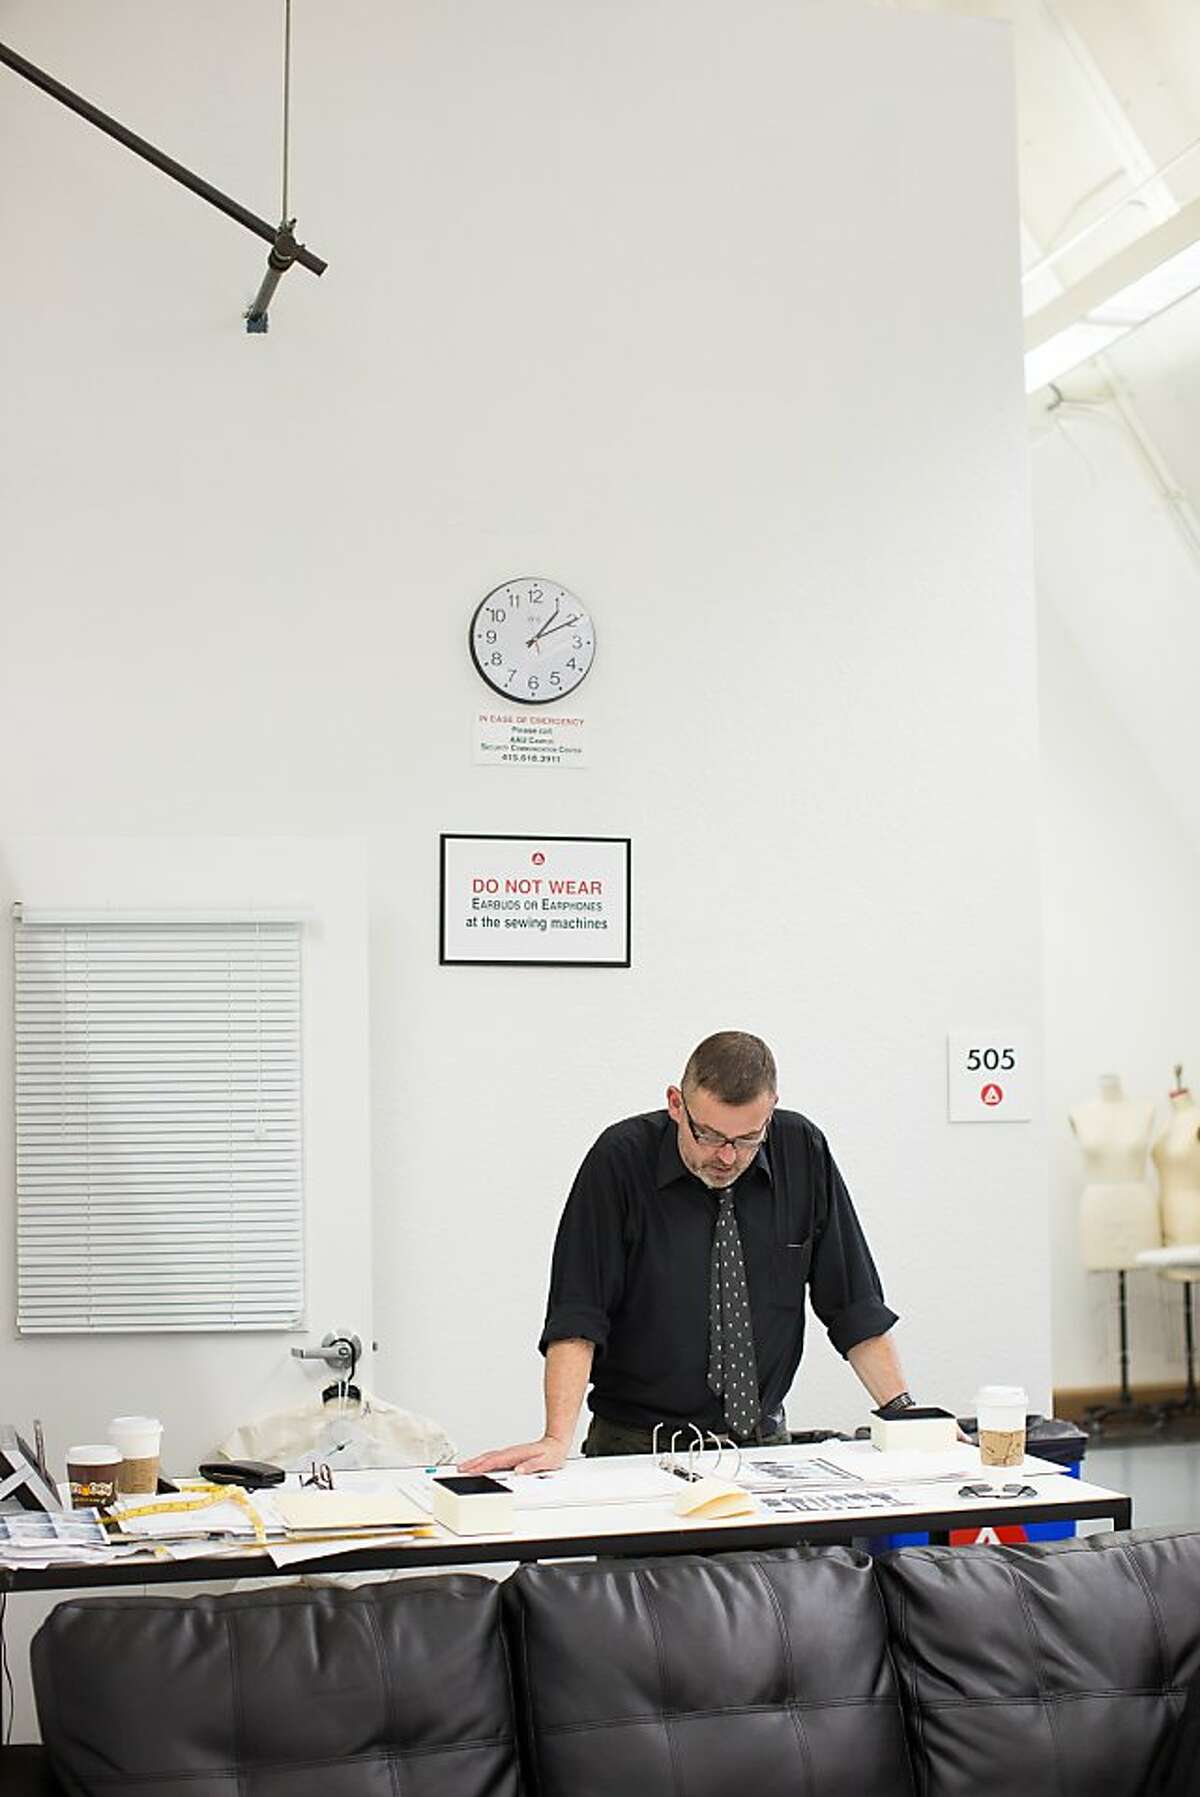 Simon Ungless, Director of the School of Fashion at the Academy of Art University, looks over student designs on Friday, Nov. 16, 2012 in San Francisco, Calif.